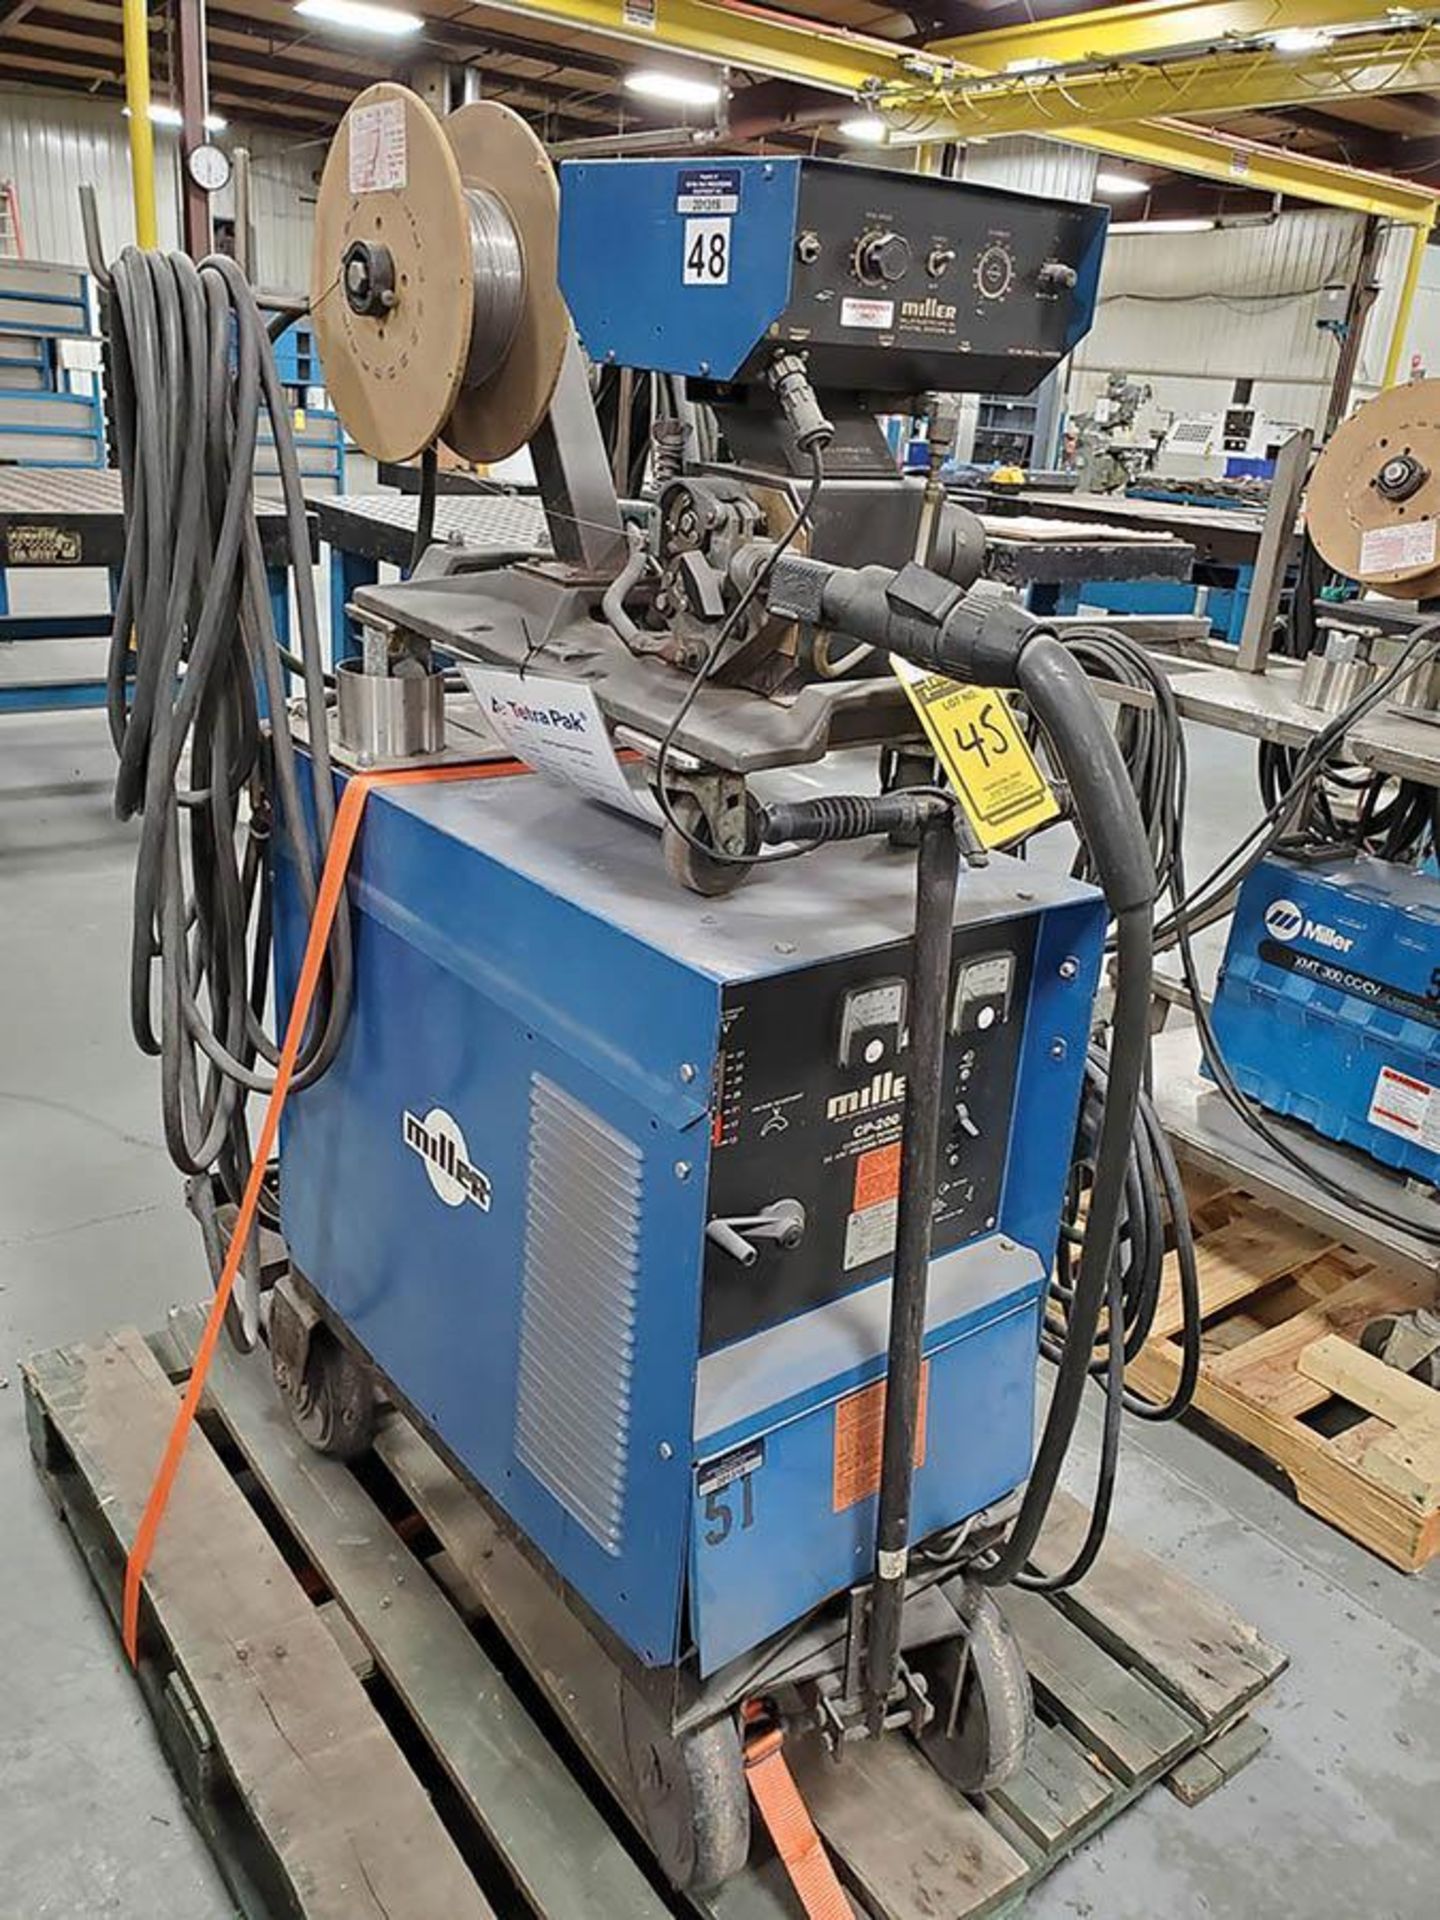 MILLER CP-200 CONSTANT POTENTIAL DC ARC WELDER ON CASTER CART WITH MILLER S-52E WIRE FEEDER - Image 3 of 6